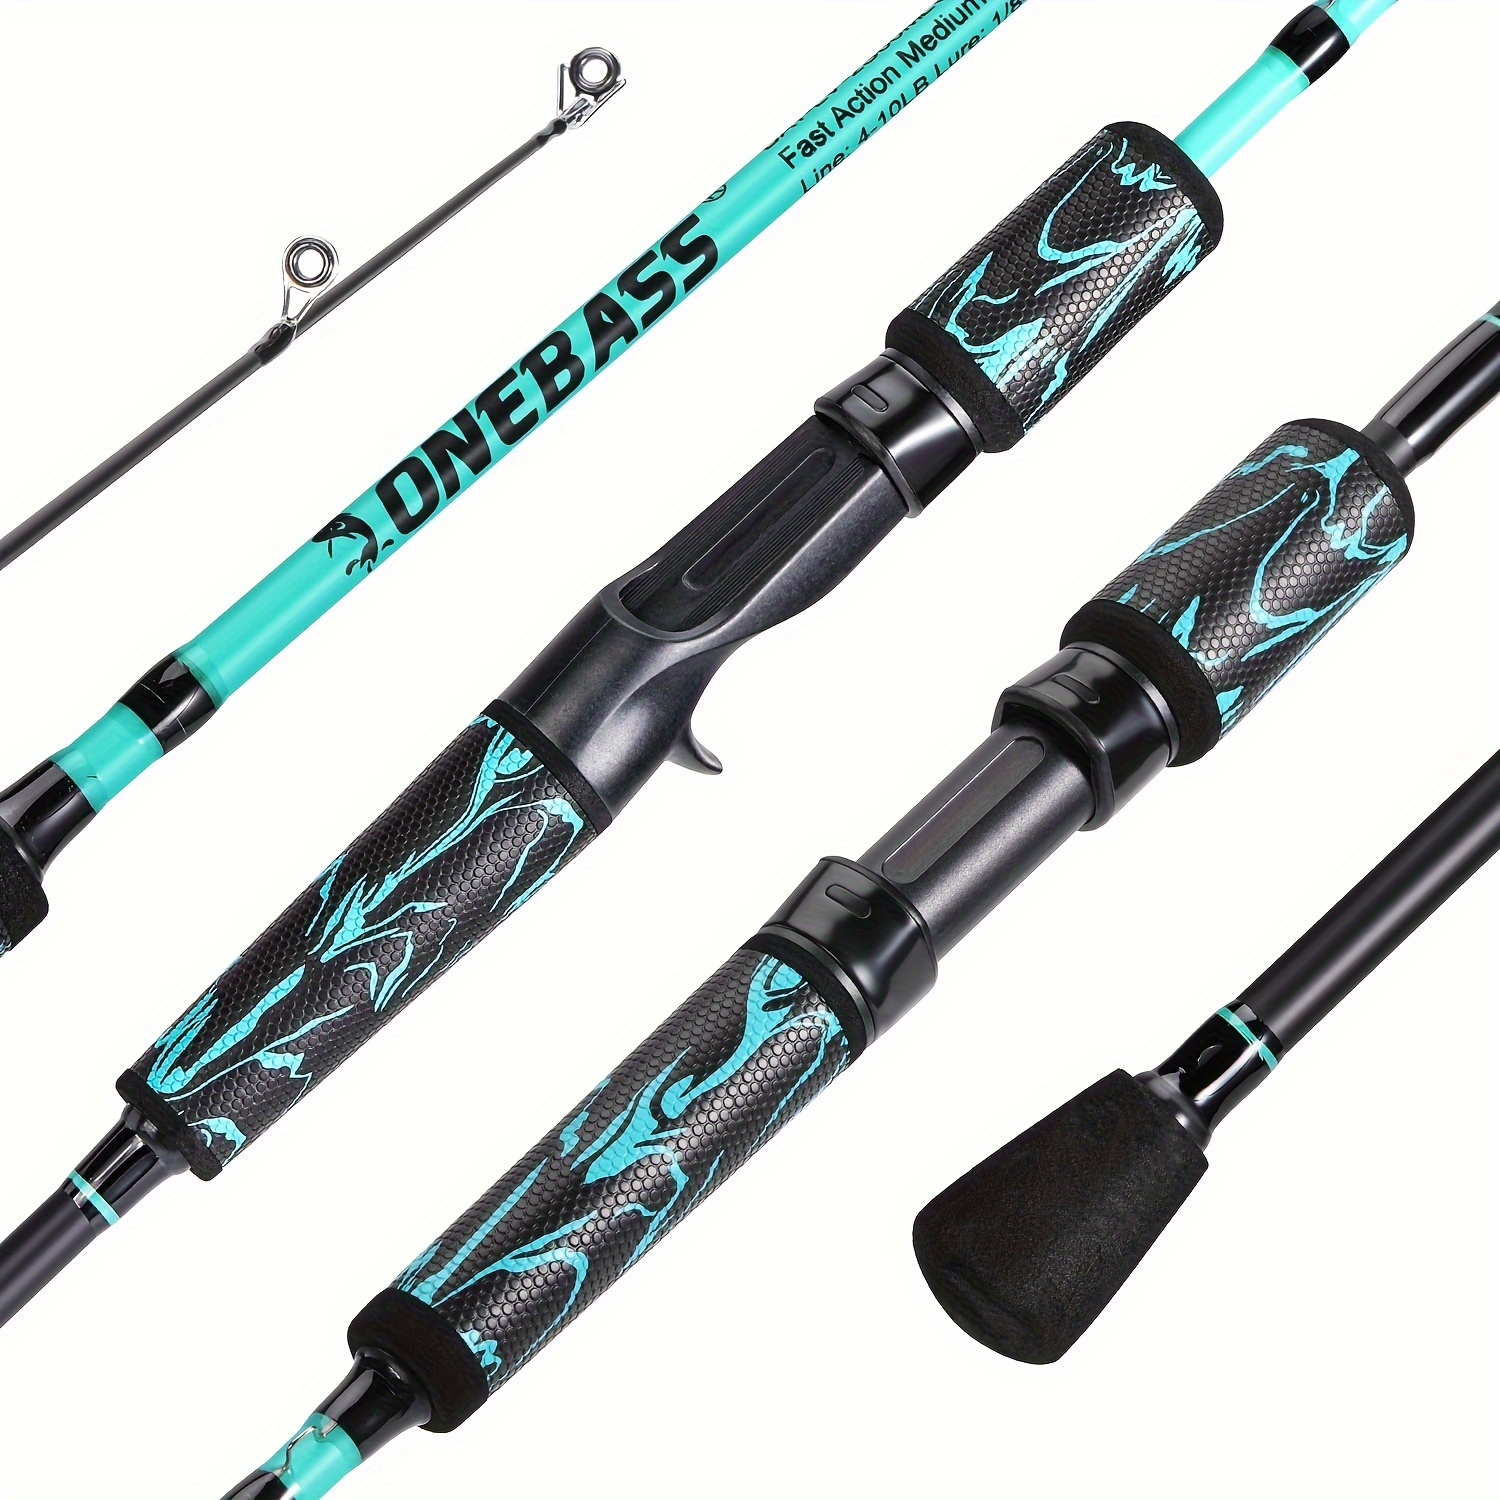 Short Sea Fishing Rod, Saltwater Freshwater Fishing Pole, Carbon Fiber  Fishing Gear, for Travel Youth Adults Beginner (Size : 3.6m)